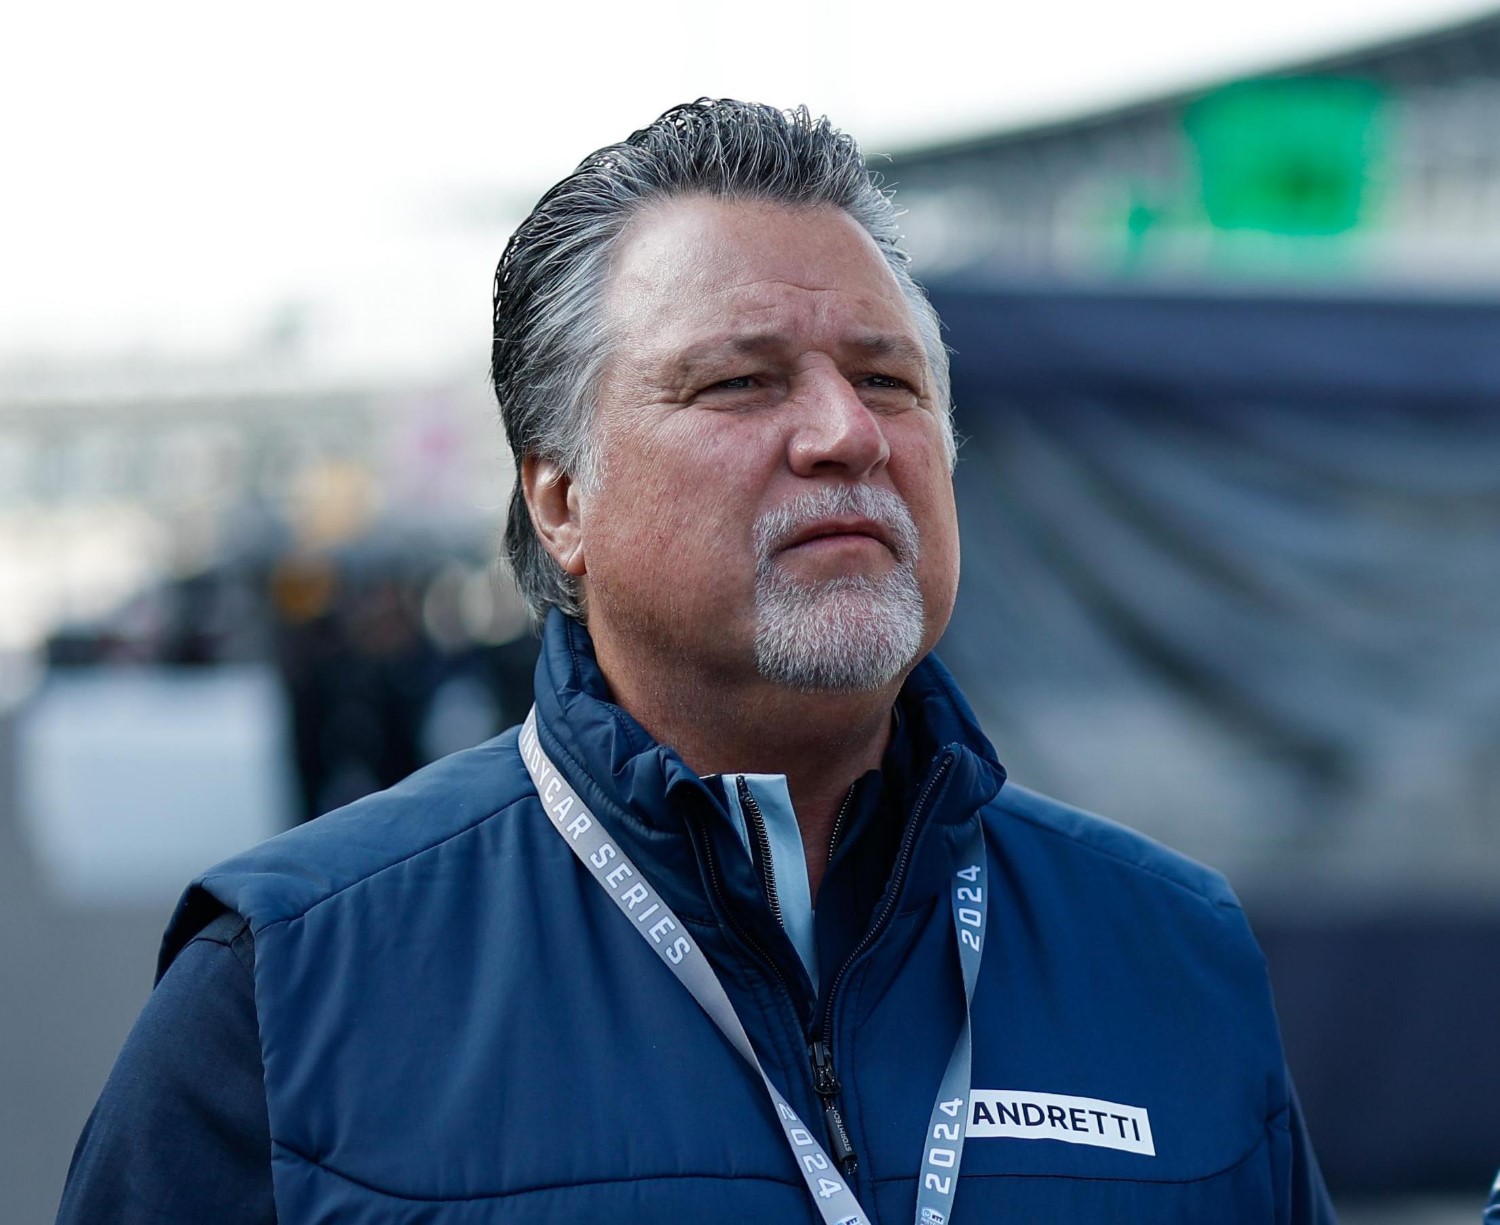 Michael Andretti in Indianapolis, IN - during testing at the Indianapolis Motor Speedway. (Photo by Joe Skibinski | IMS Photo)